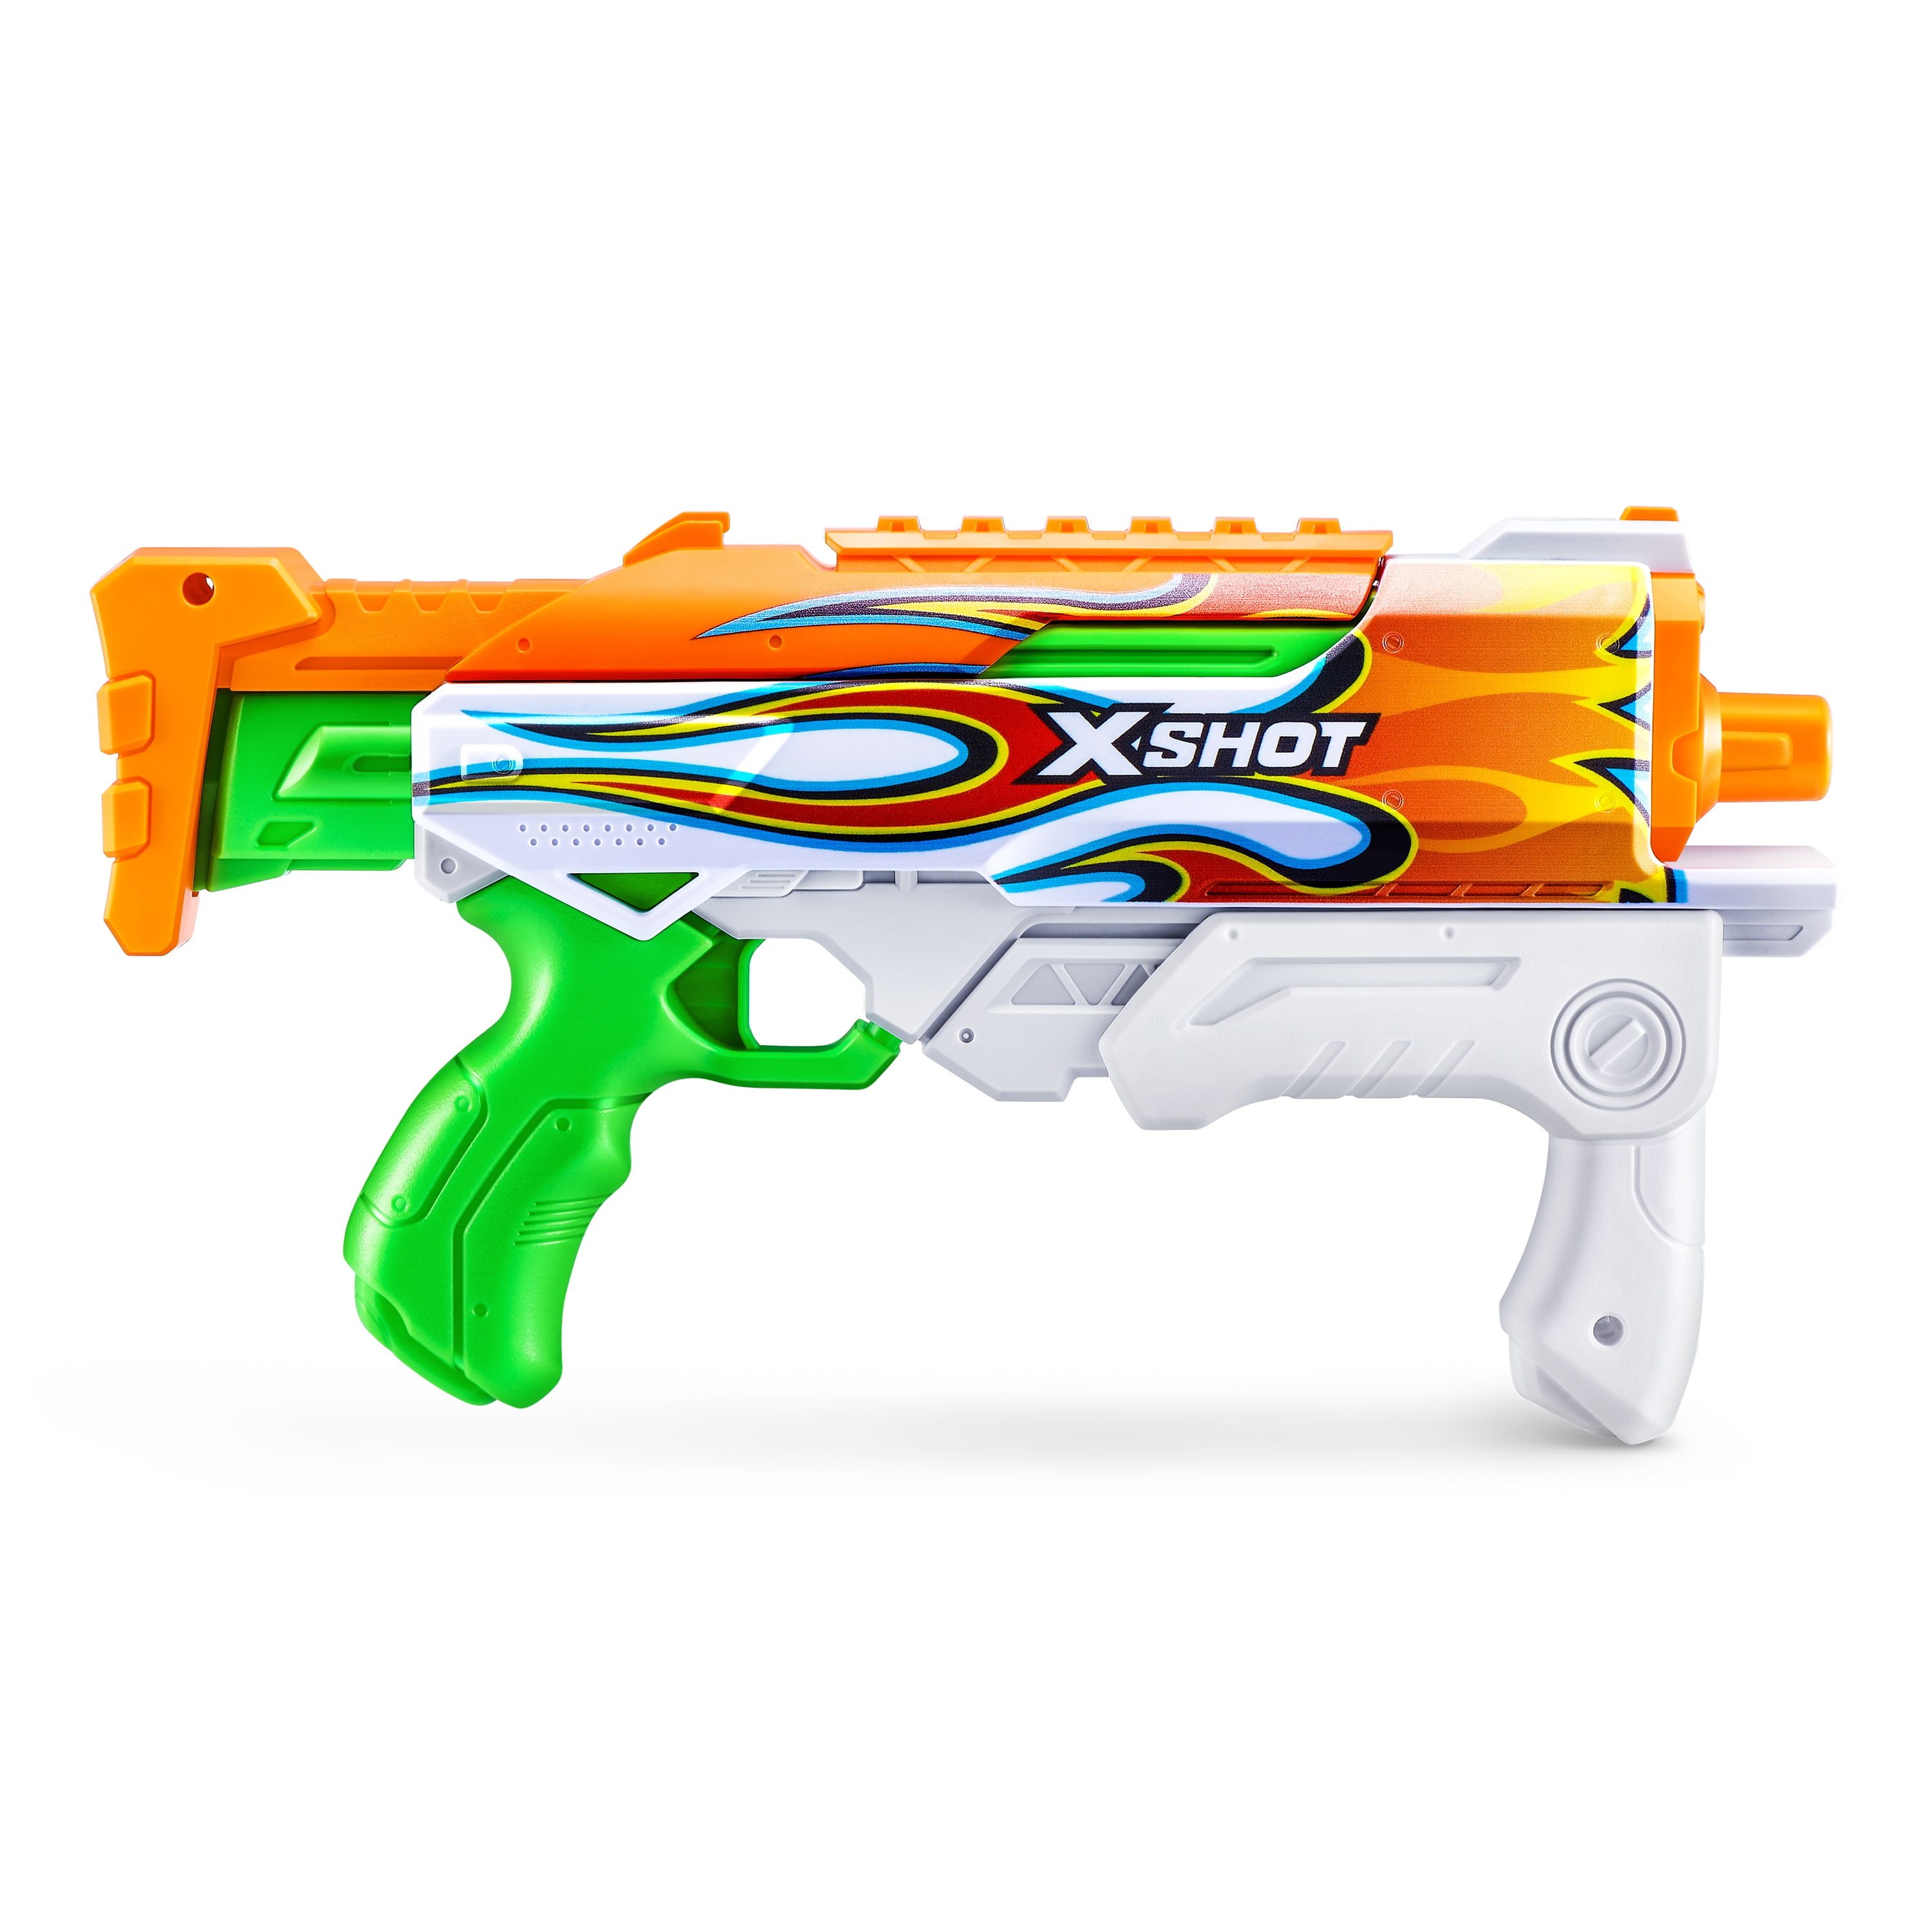 Xshot Insanity available @toyscity_id 💥 Discover the excitement